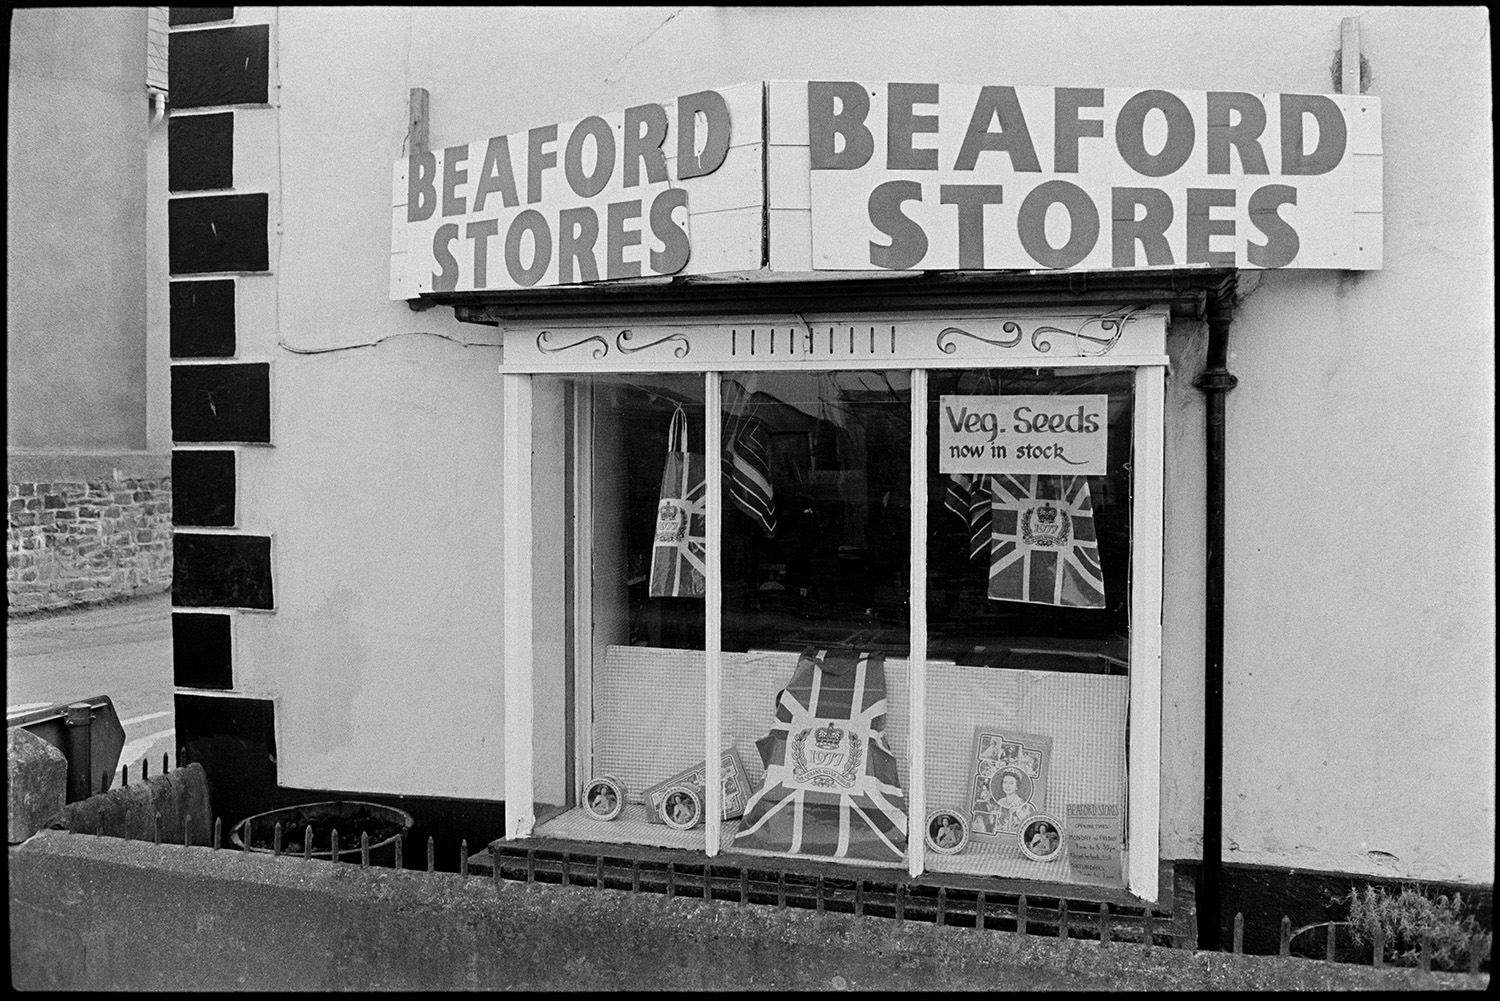 Front of village stores. 
[The shop front window of Beaford Stores in Beaford. Items for Queen Elizabeth II Silver Jubilee are displayed in the window, as well as a sign advertising vegetable seeds.]